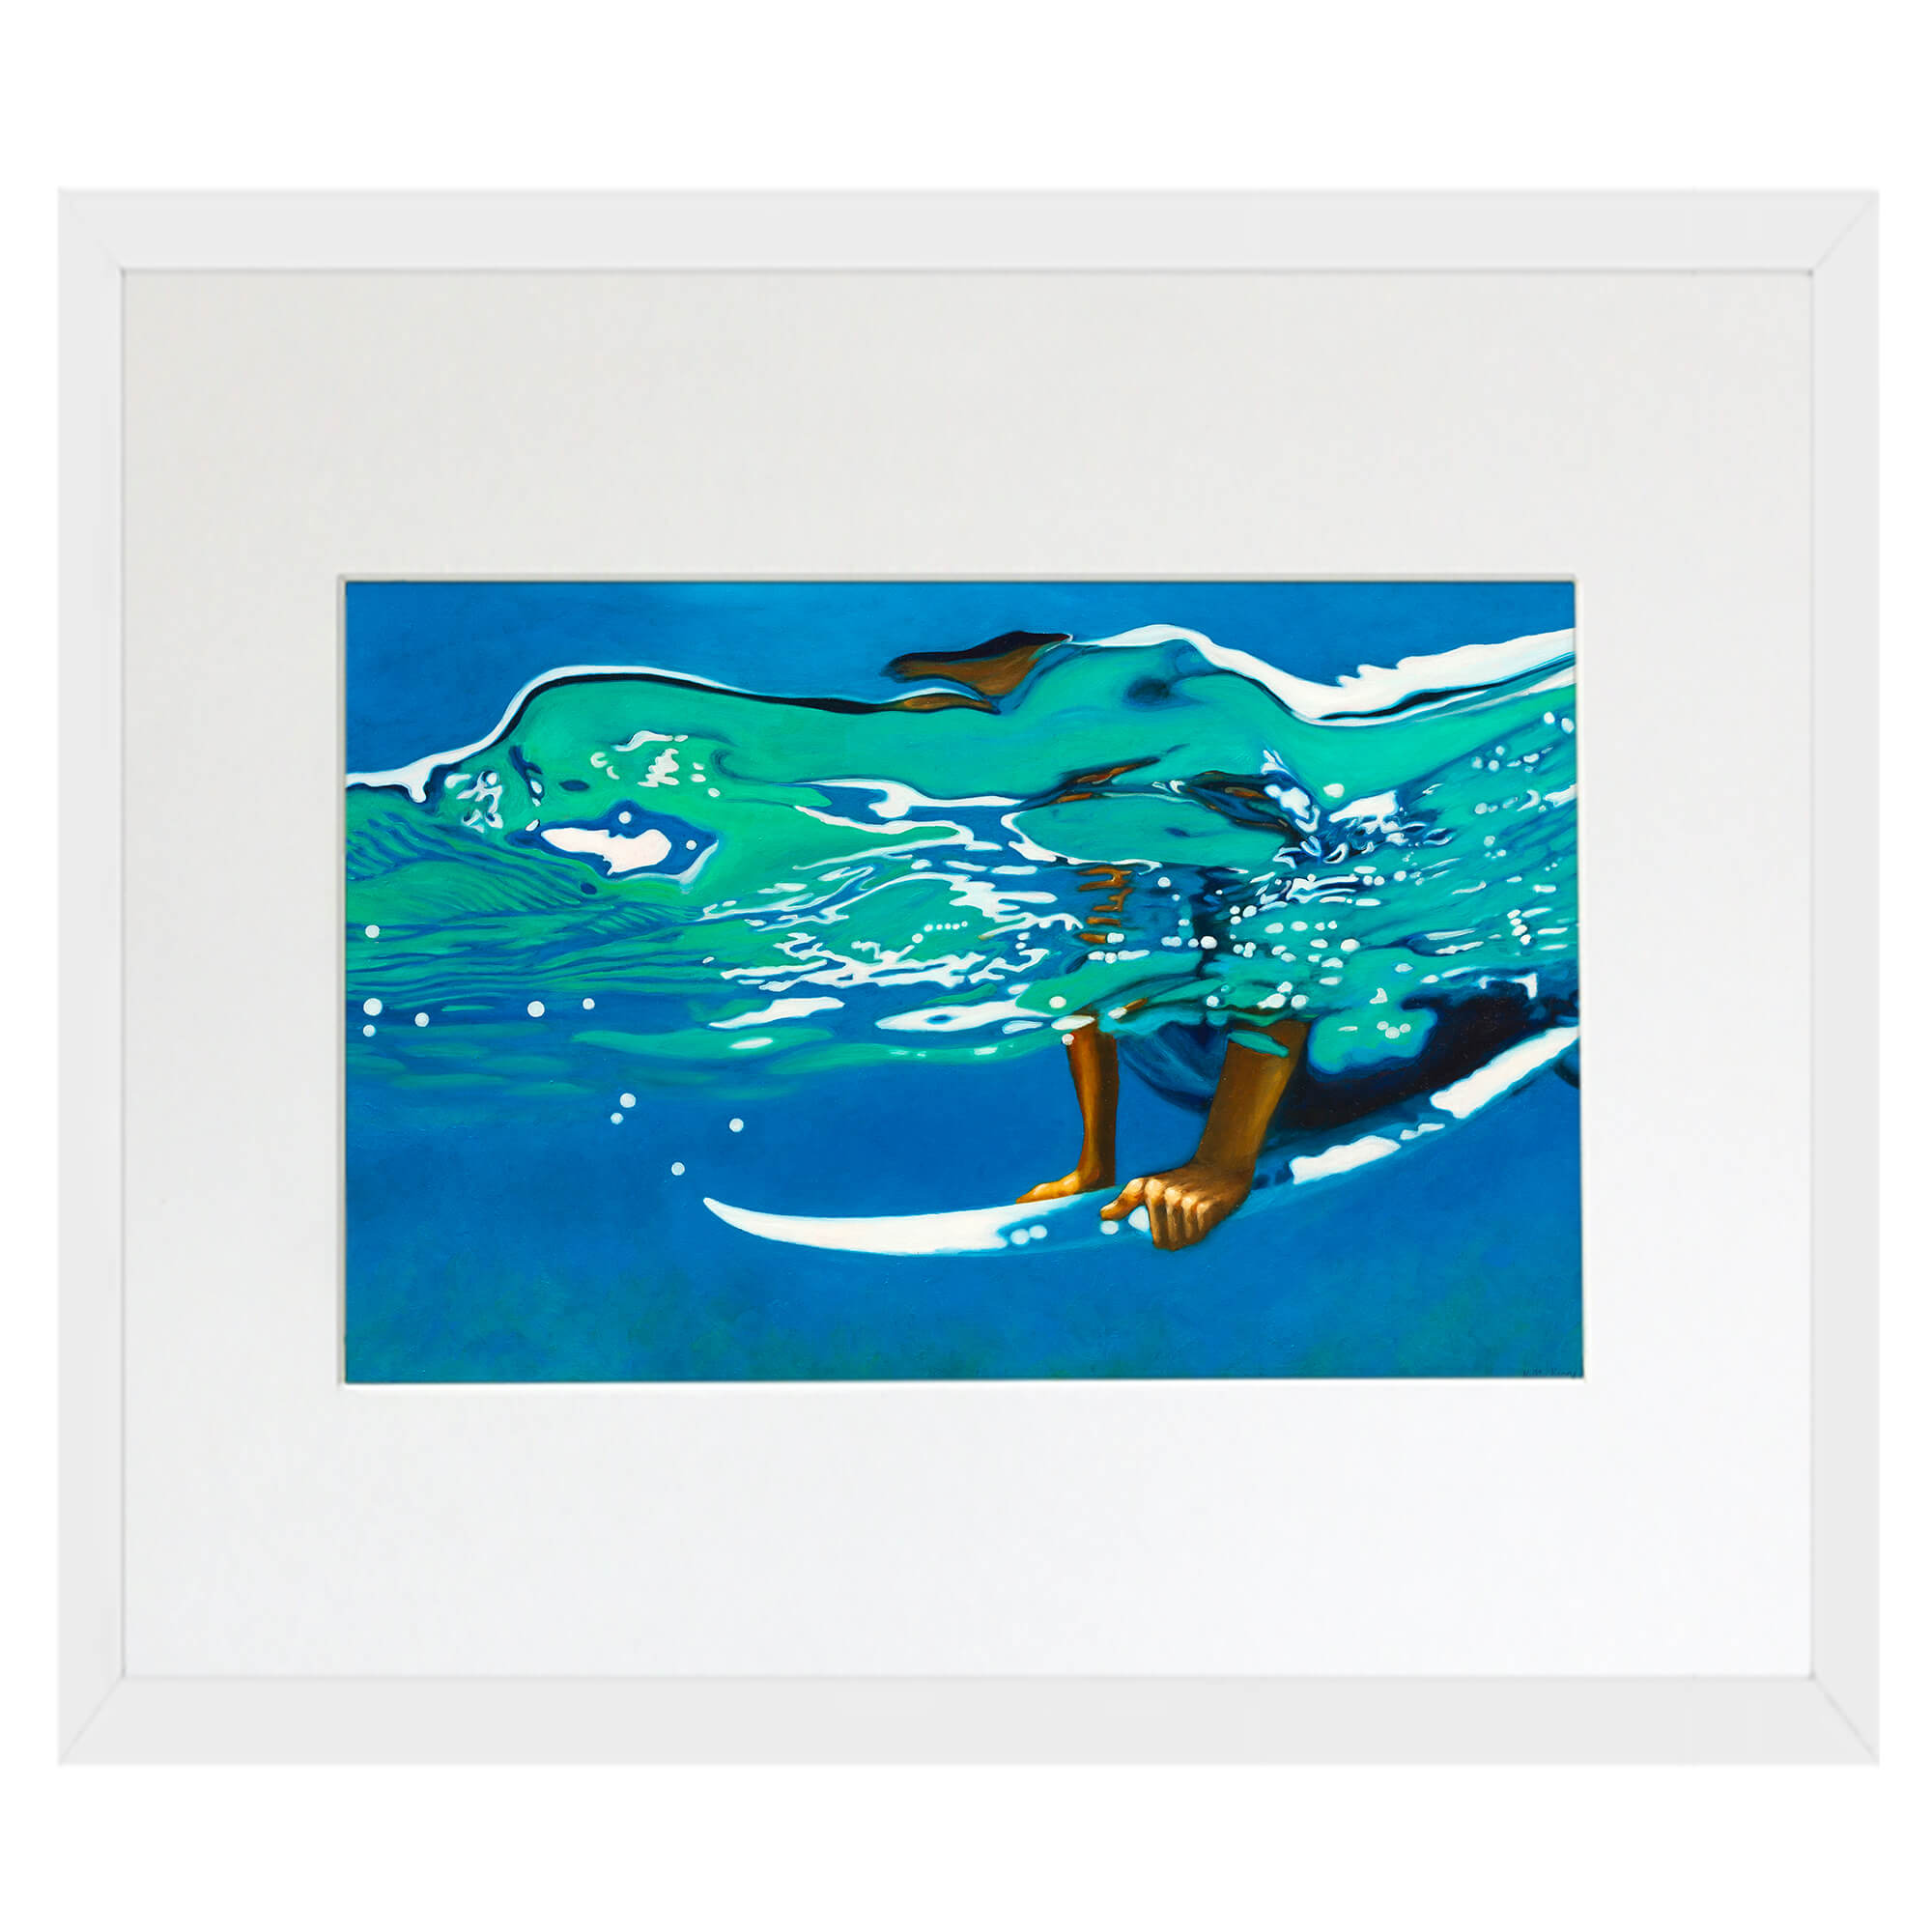 A matted art print with white frame featuring a woman surfing  by hawaii artist Kelly Keane